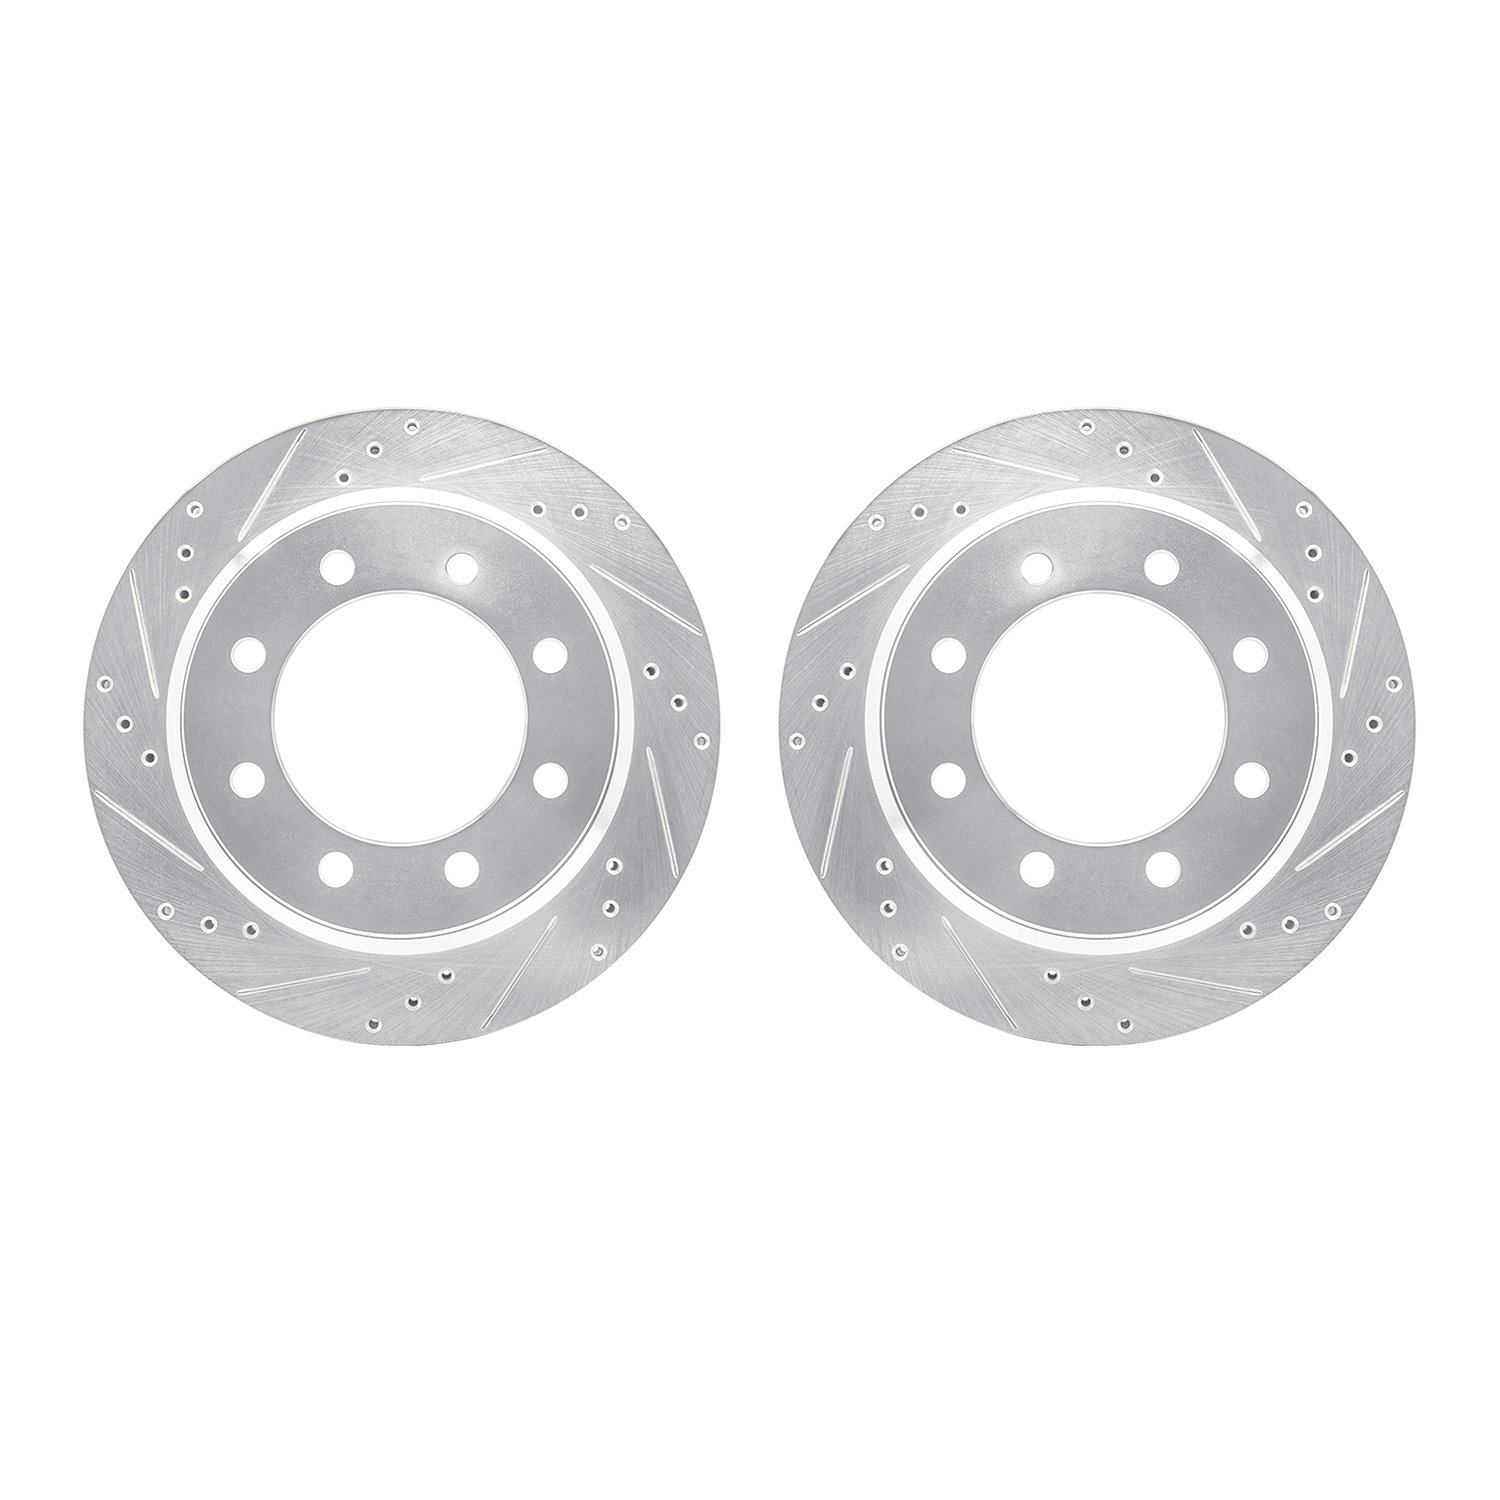 7002-54189 Drilled/Slotted Brake Rotors [Silver], Fits Select Ford/Lincoln/Mercury/Mazda, Position: Rear